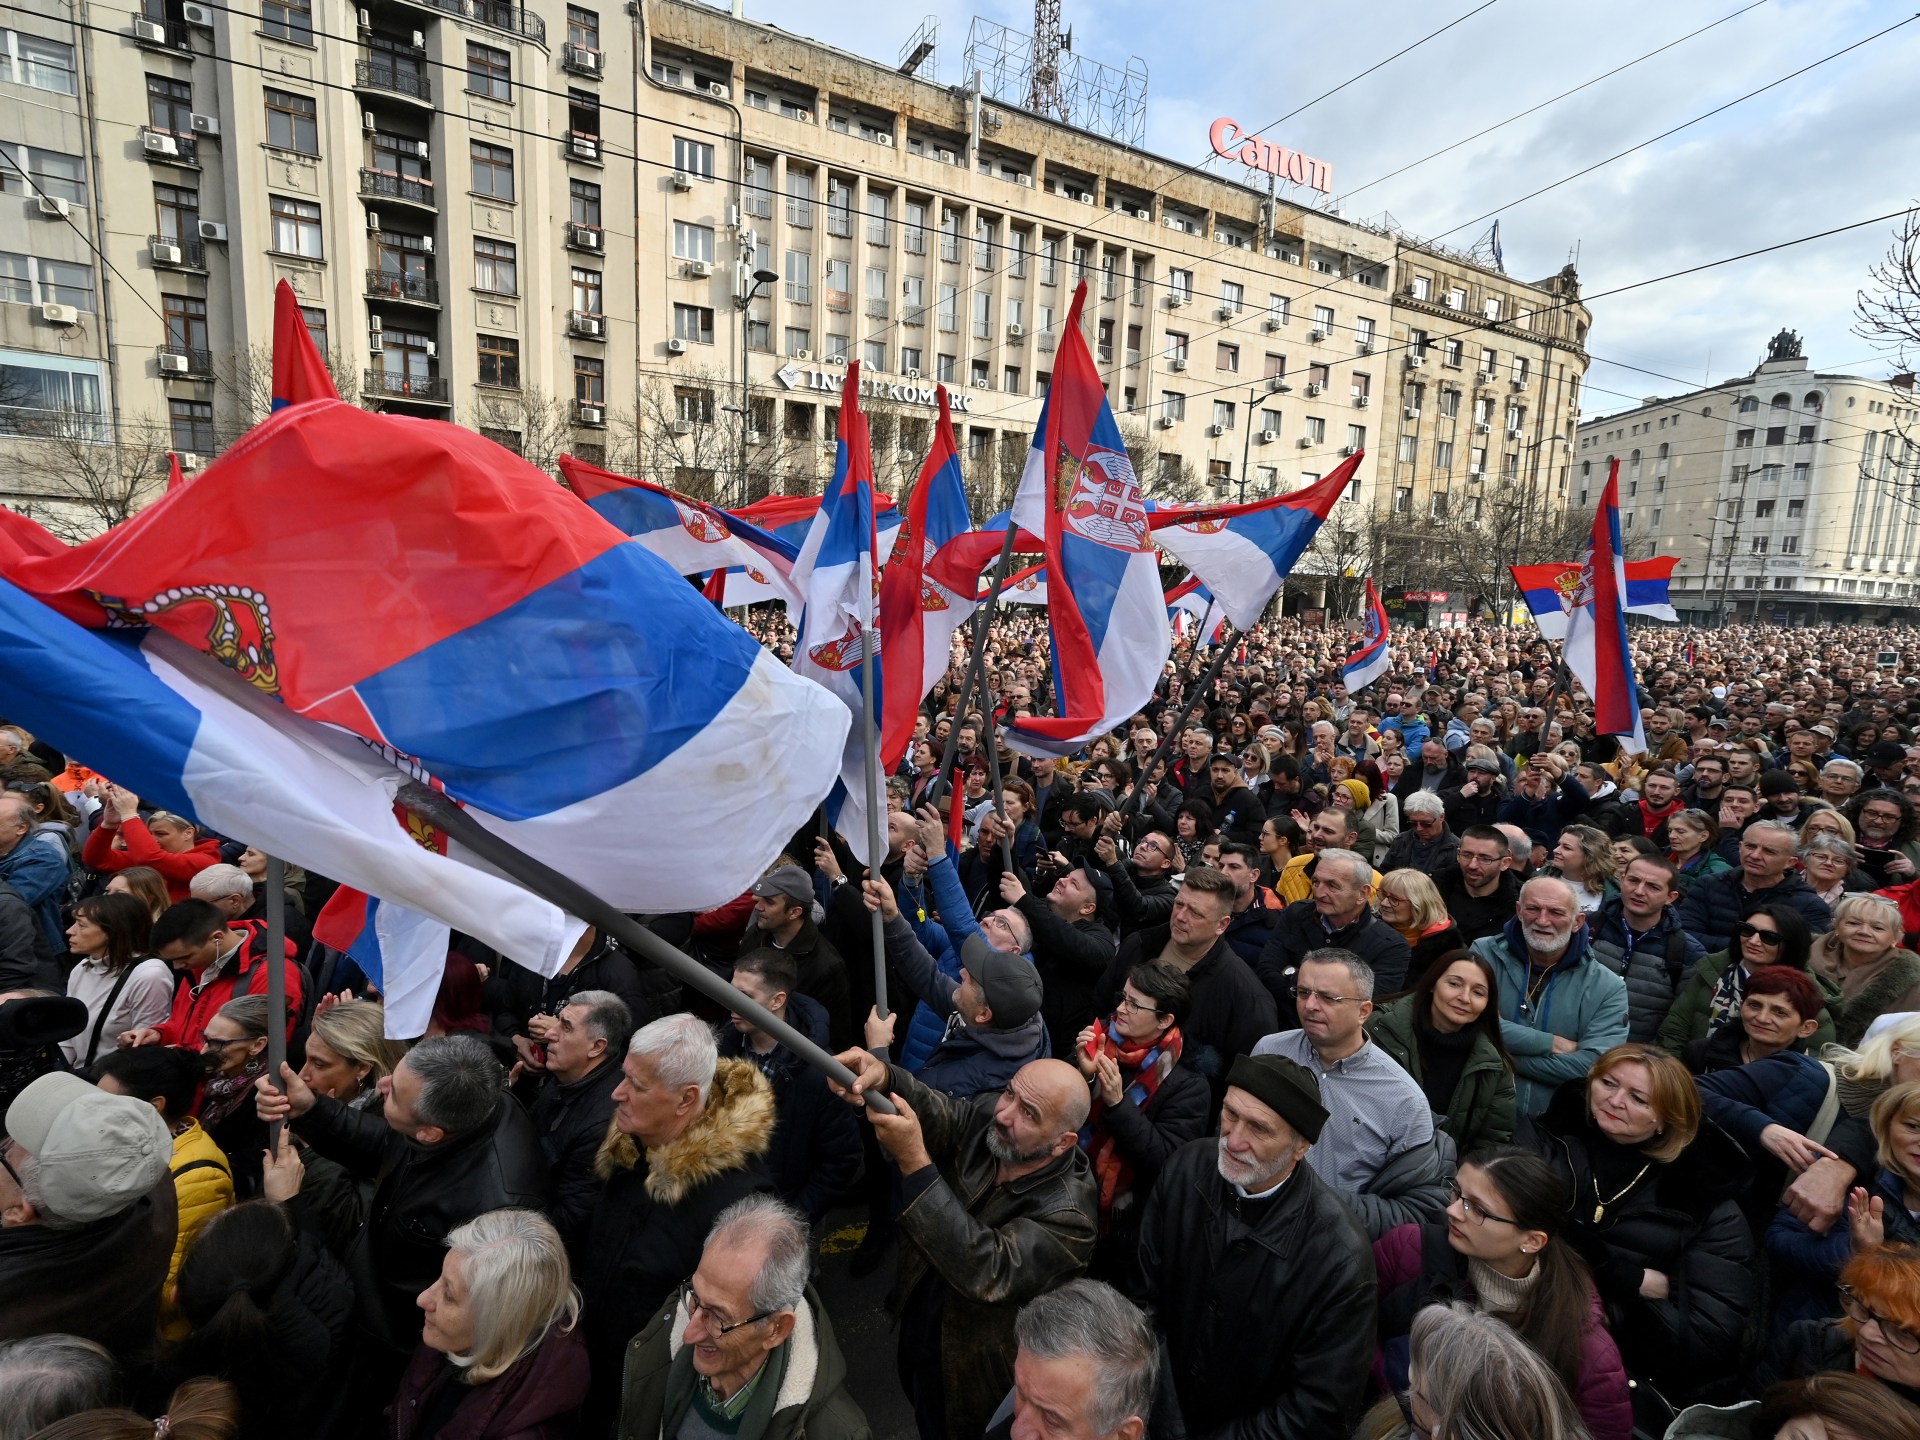 Thousands protest in Serbia alleging election fraud by governing party | Elections News